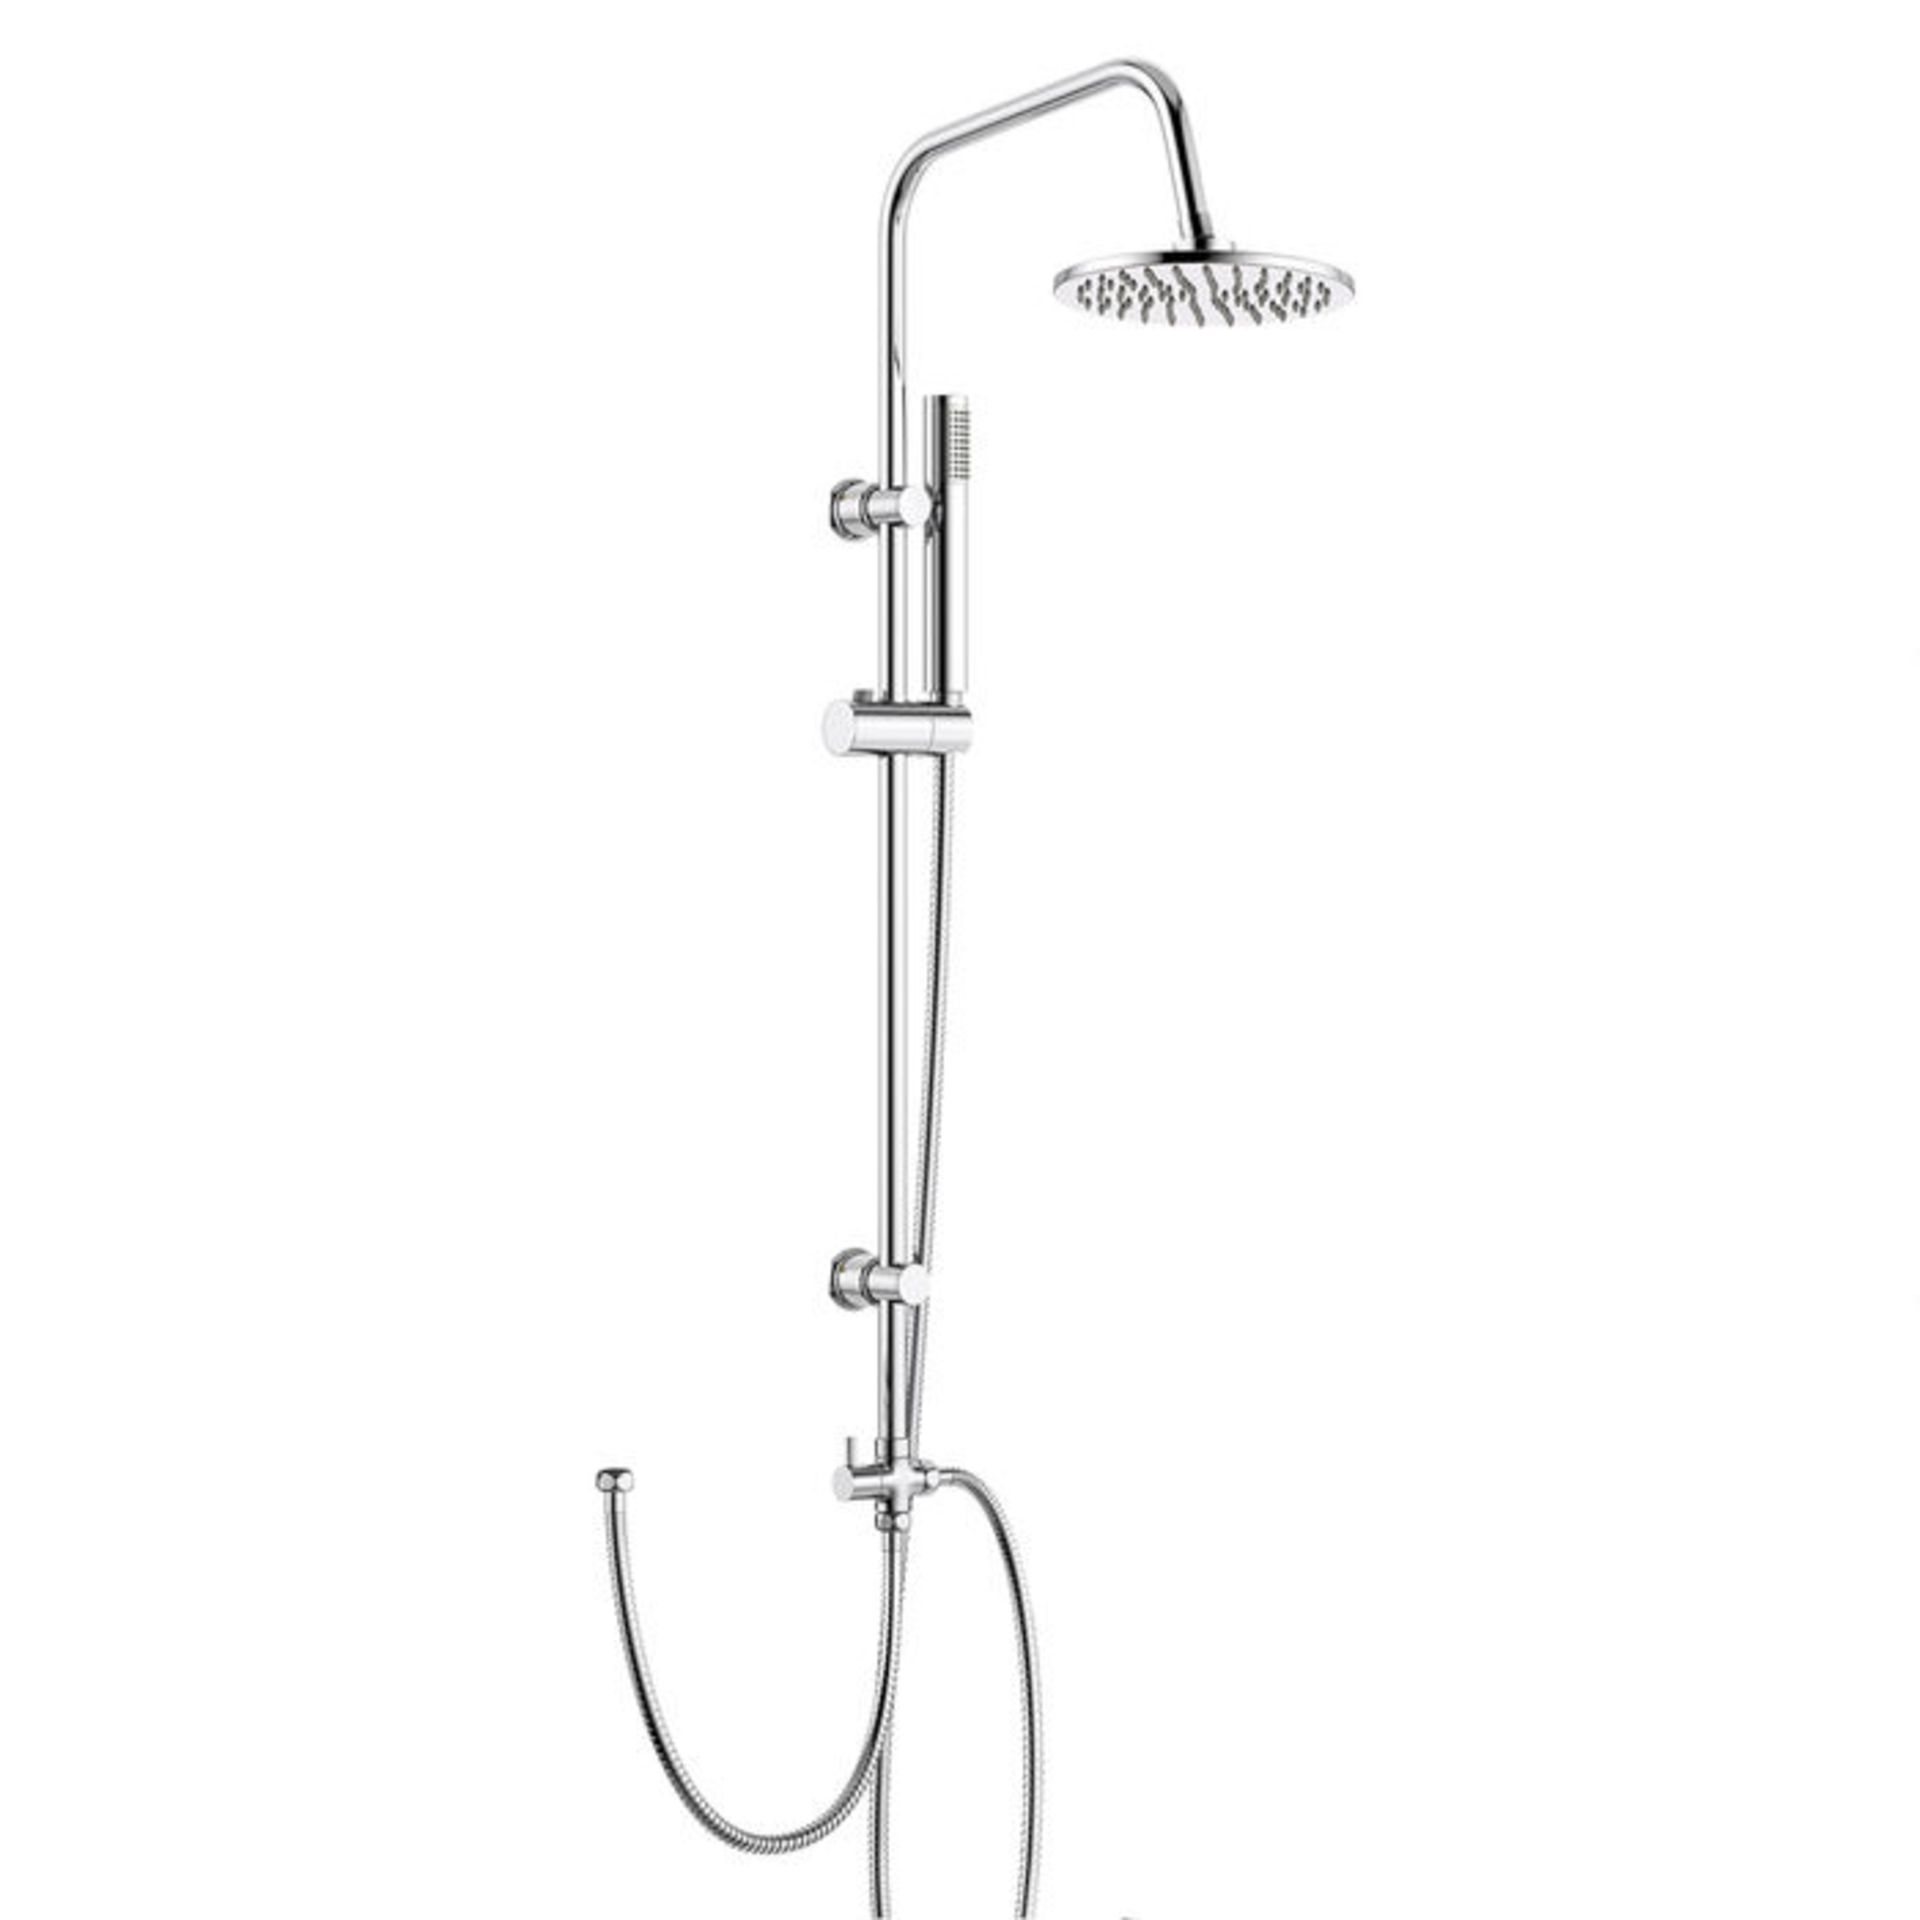 (LU104) 200mm Round Head Riser Rail & Handheld Kit. Quality stainless steel shower head with Easy - Image 2 of 4